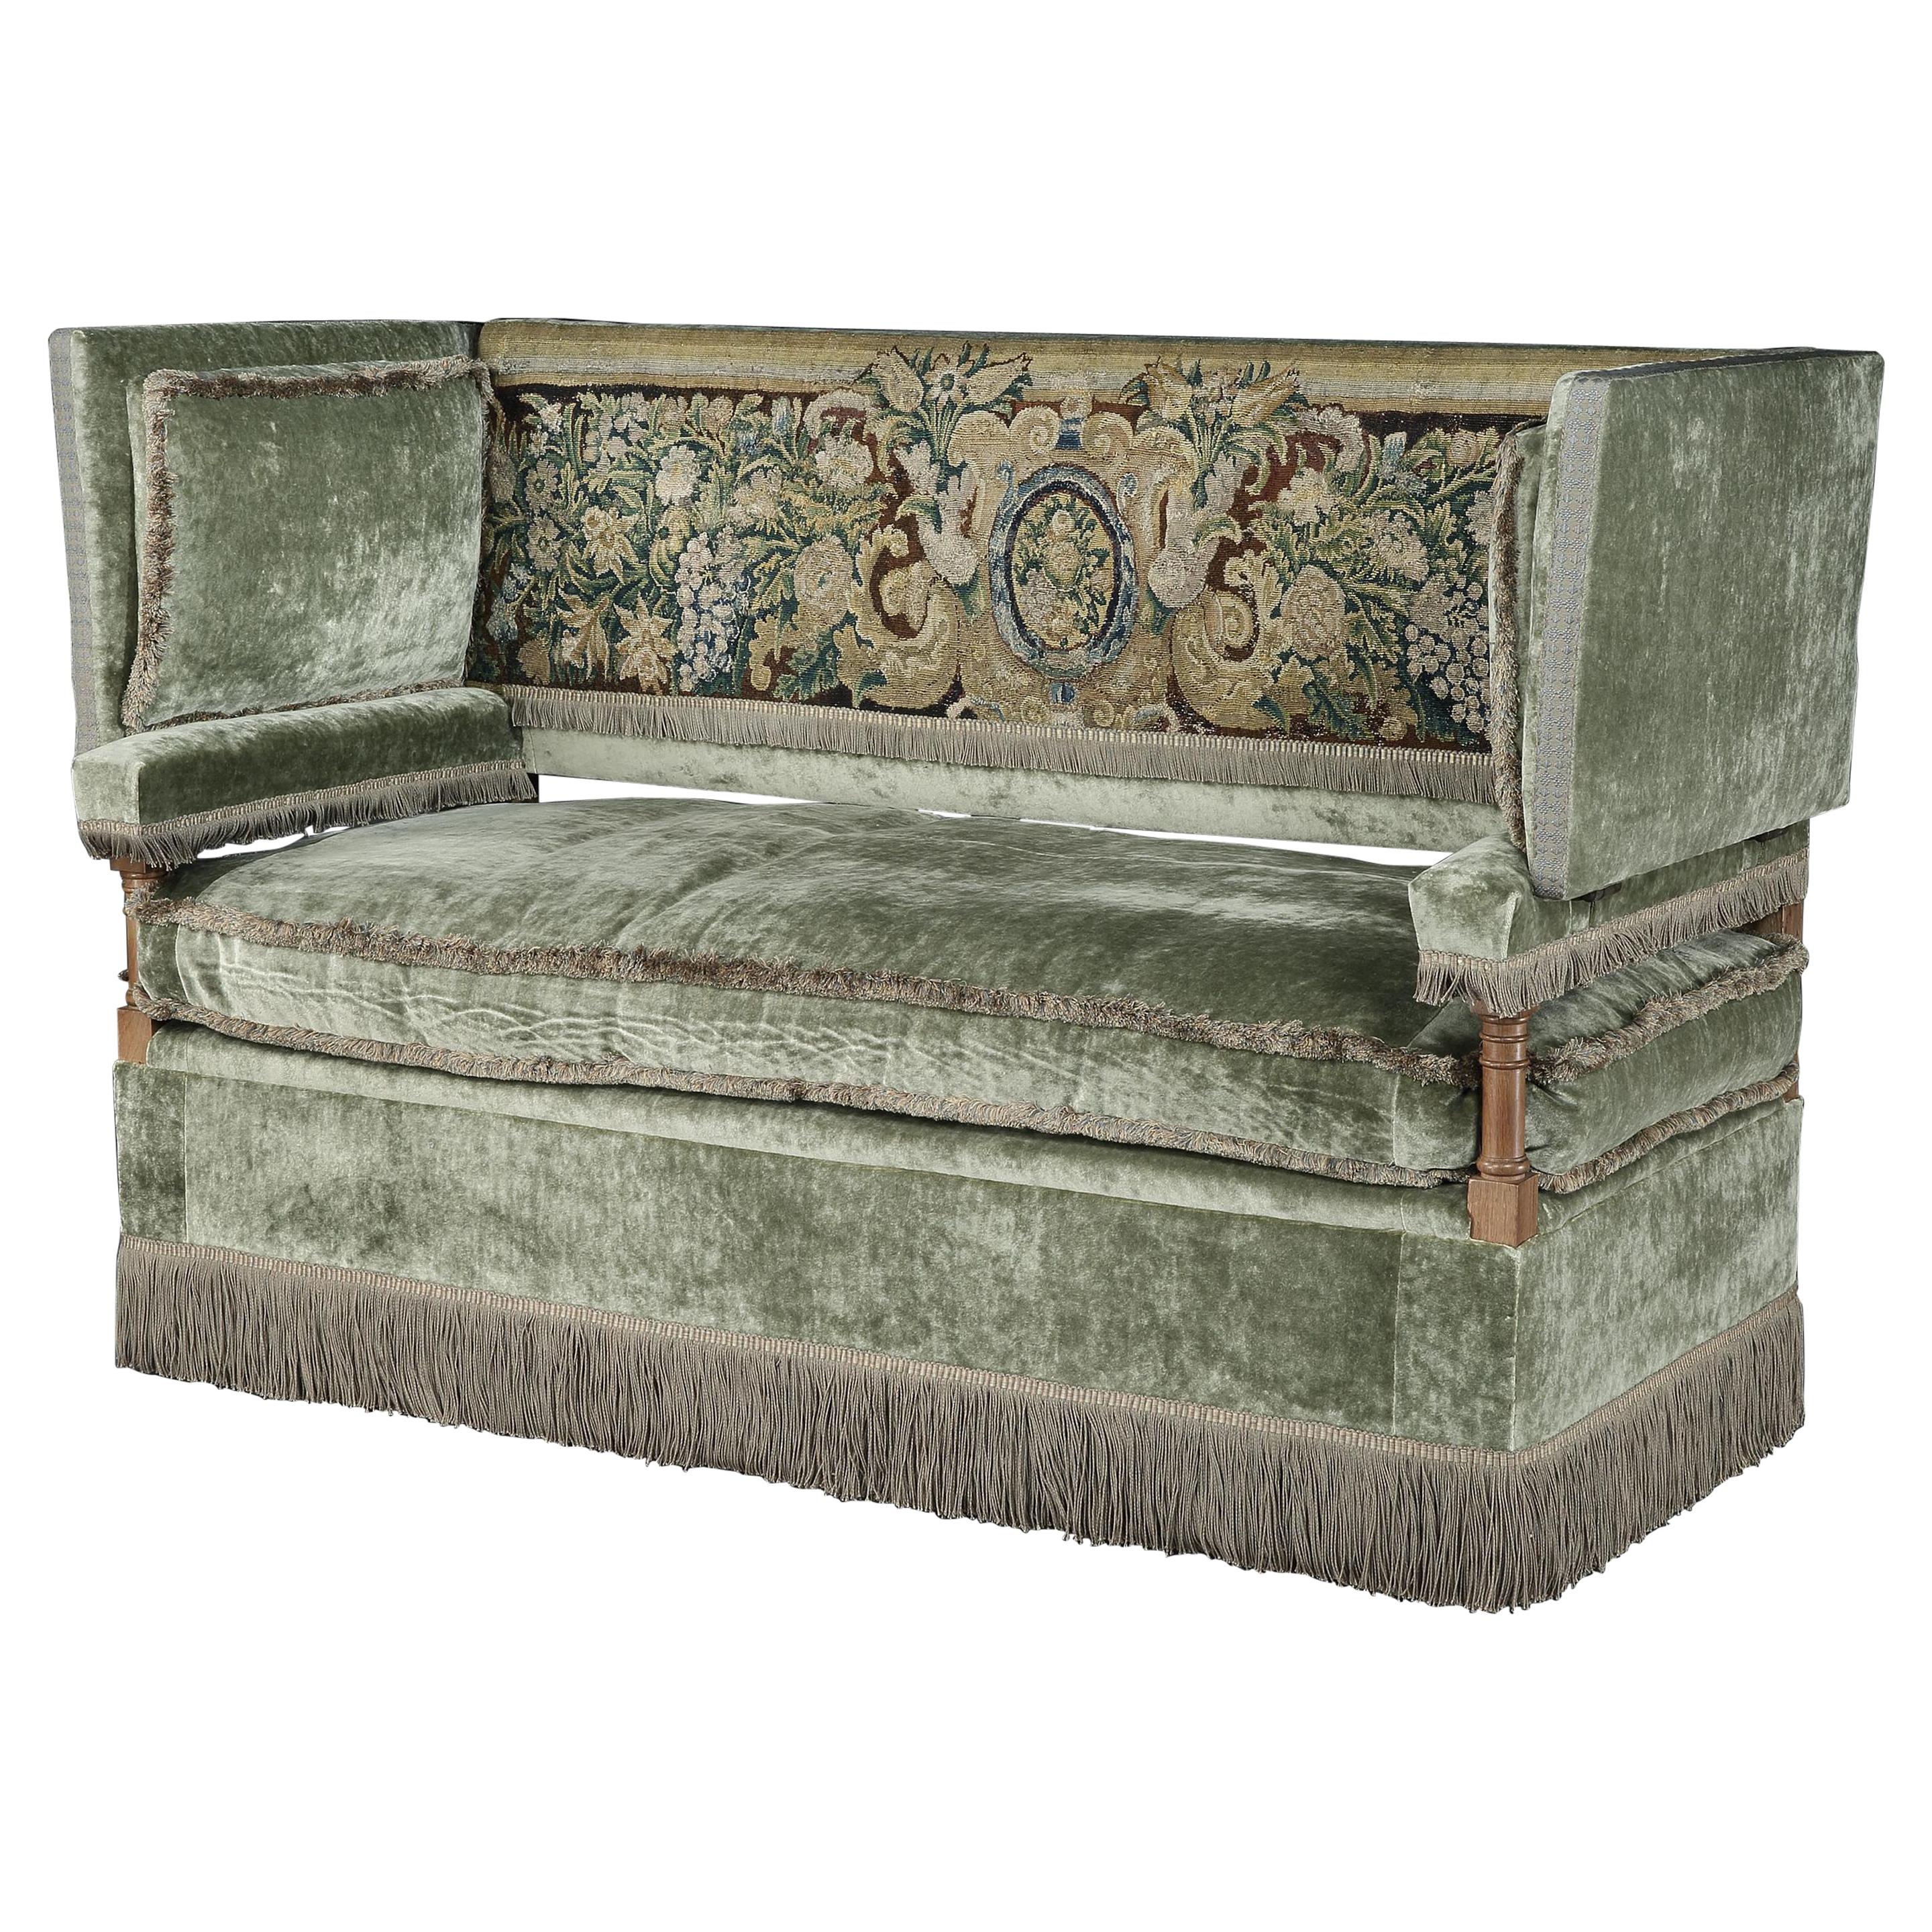 Knole Settee, Cowdray Park, English, Lengyon & Co, olive velvet, tapestry For Sale